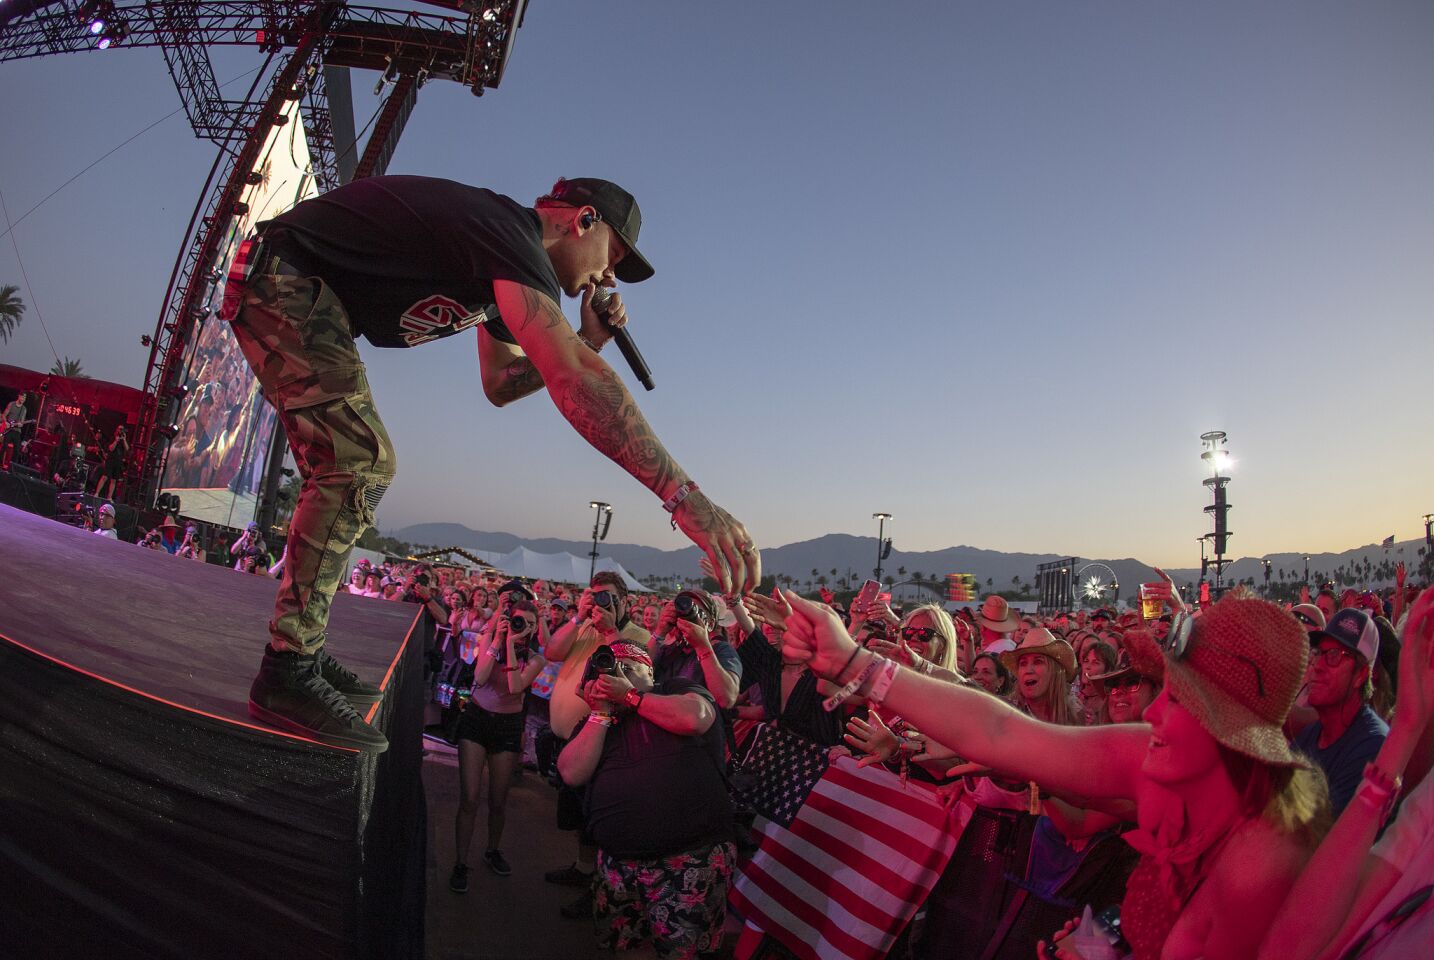 Kane Brown greets a fan while performing on the Mane Stage on the first day of the three-day 2019 Stagecoach Country Music Festival.